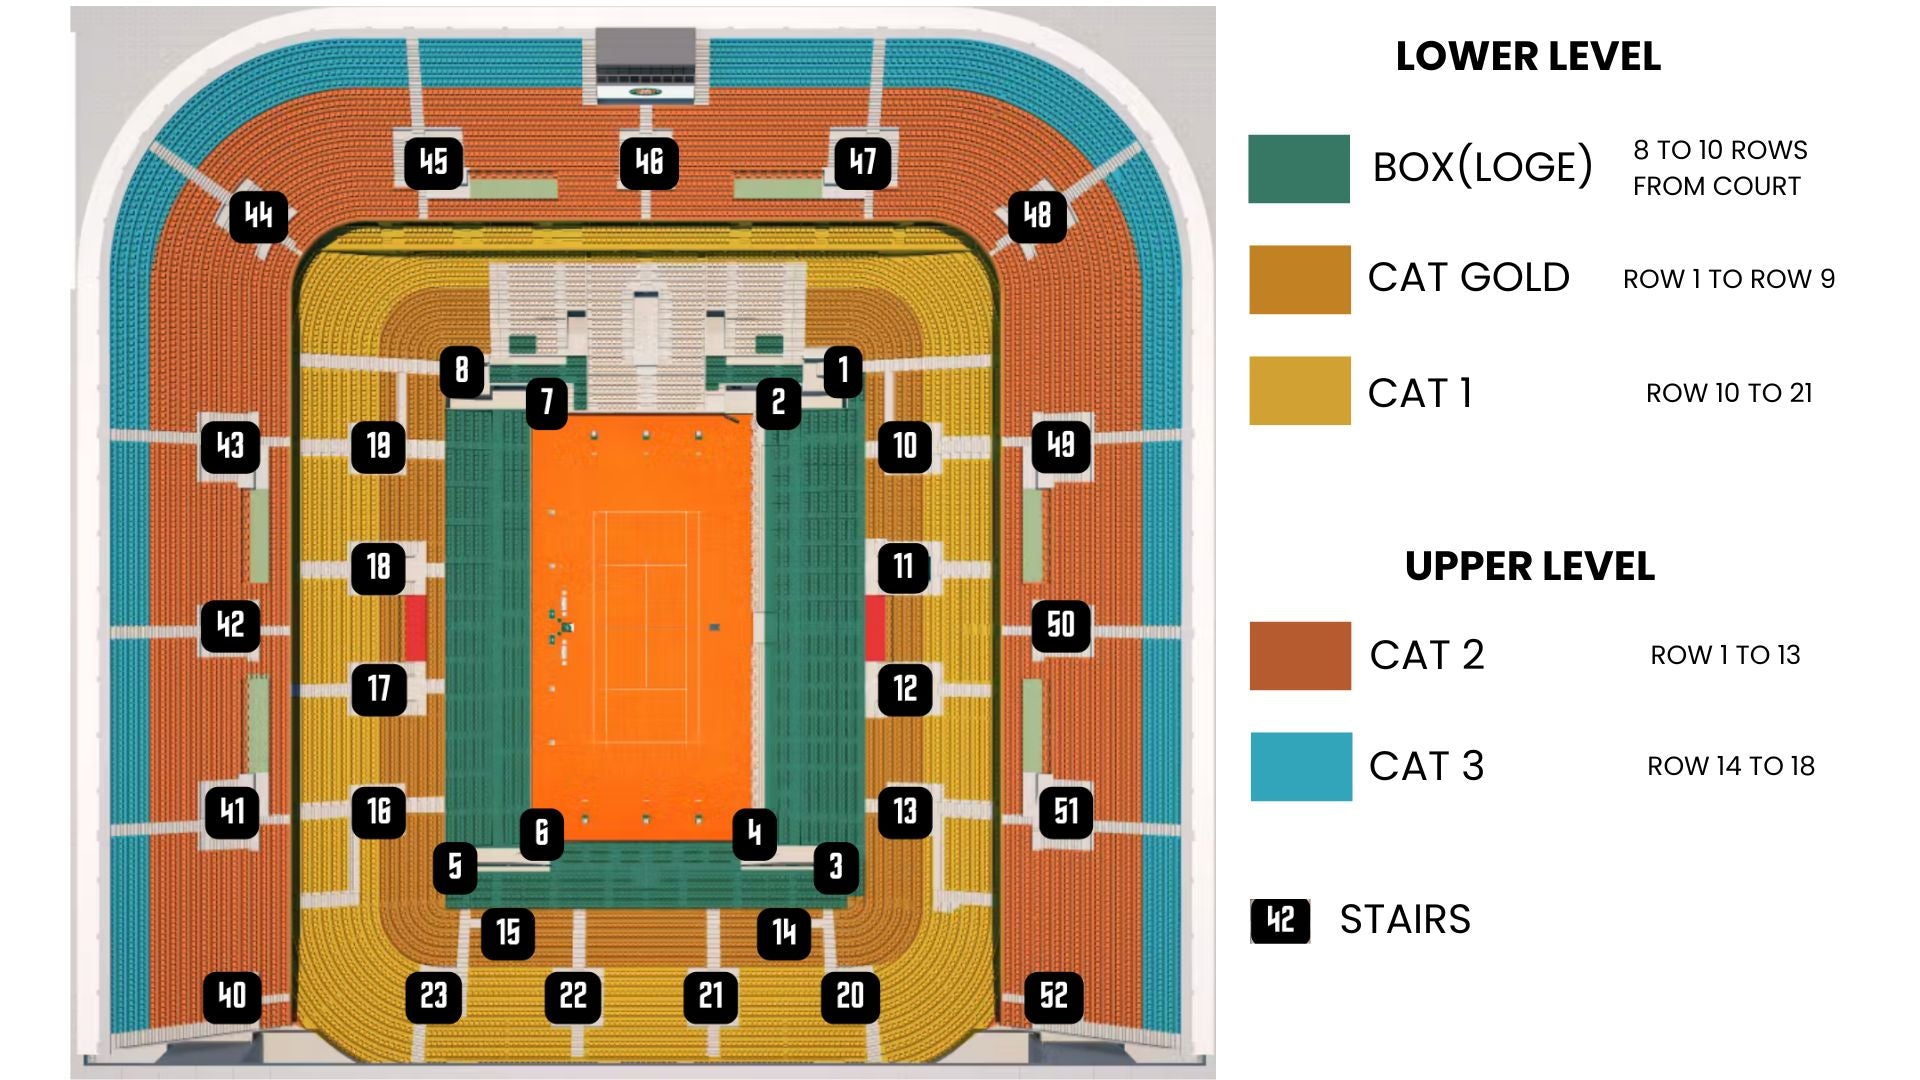 French Open Tickets 6/9/2024 - Sunday Final Mens - Philippe Chatrier (Center Court)